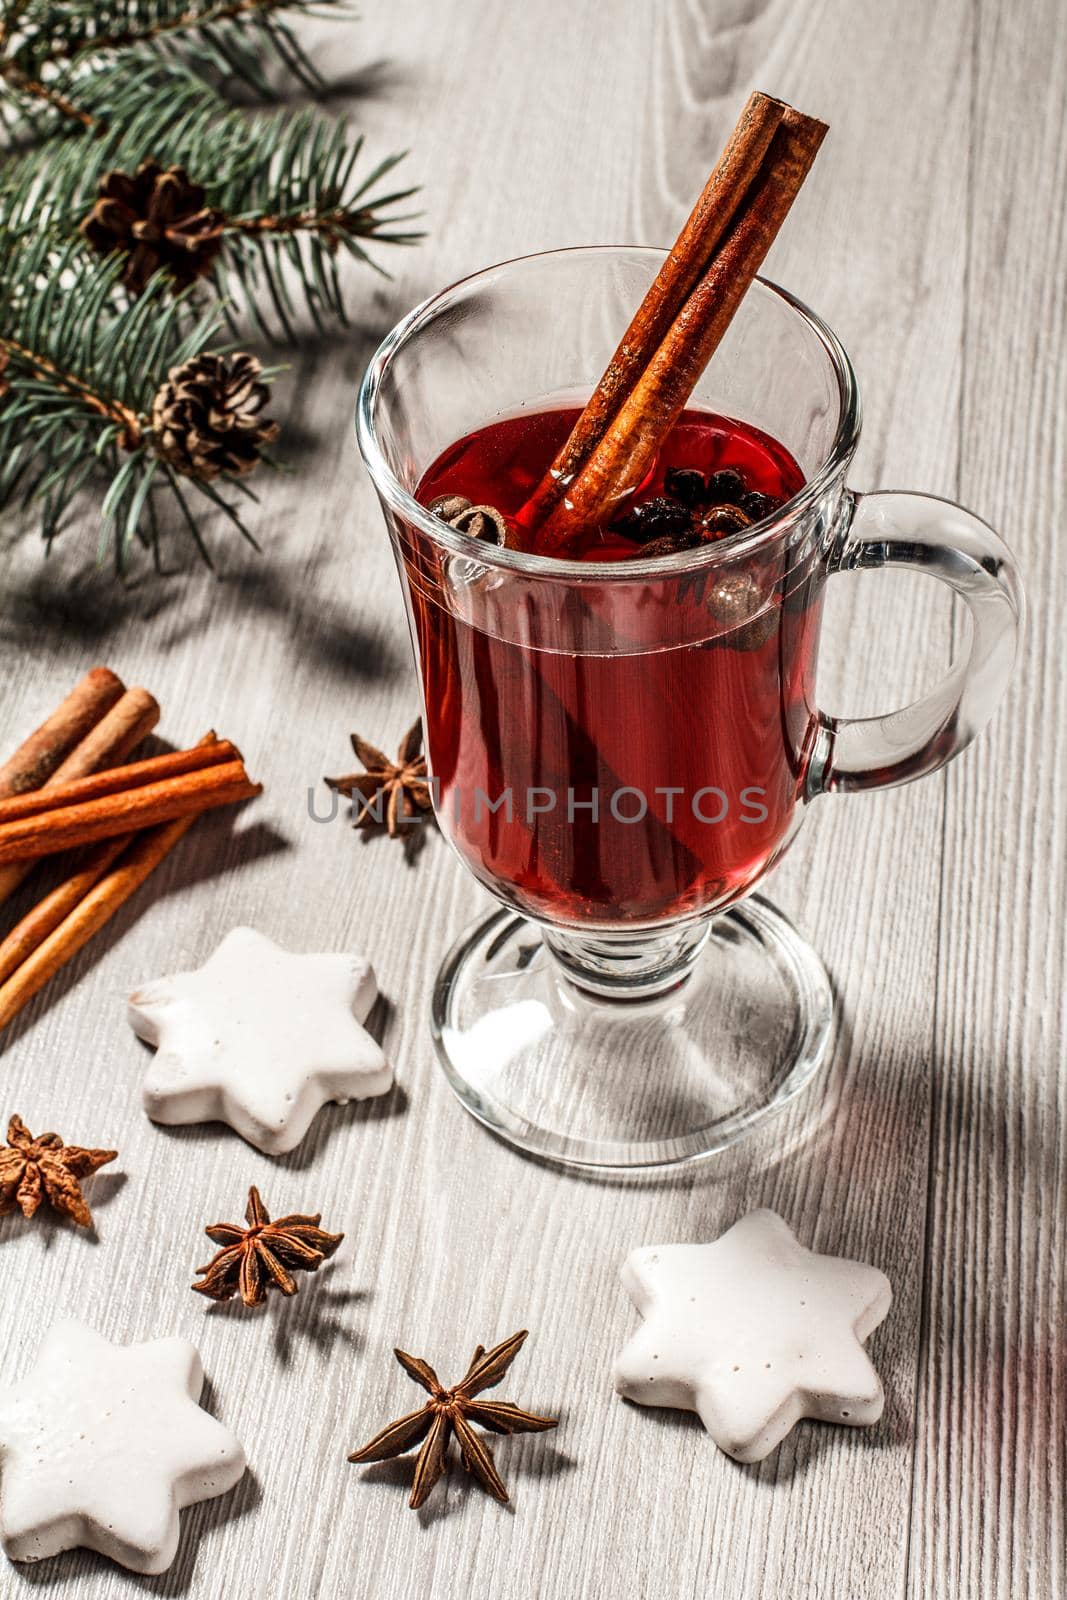 Glass of Christmas mulled wine with cinnamon, star anise and cloves on wooden background with white biscuits, natural fir tree branches and cones. Color toning effect.